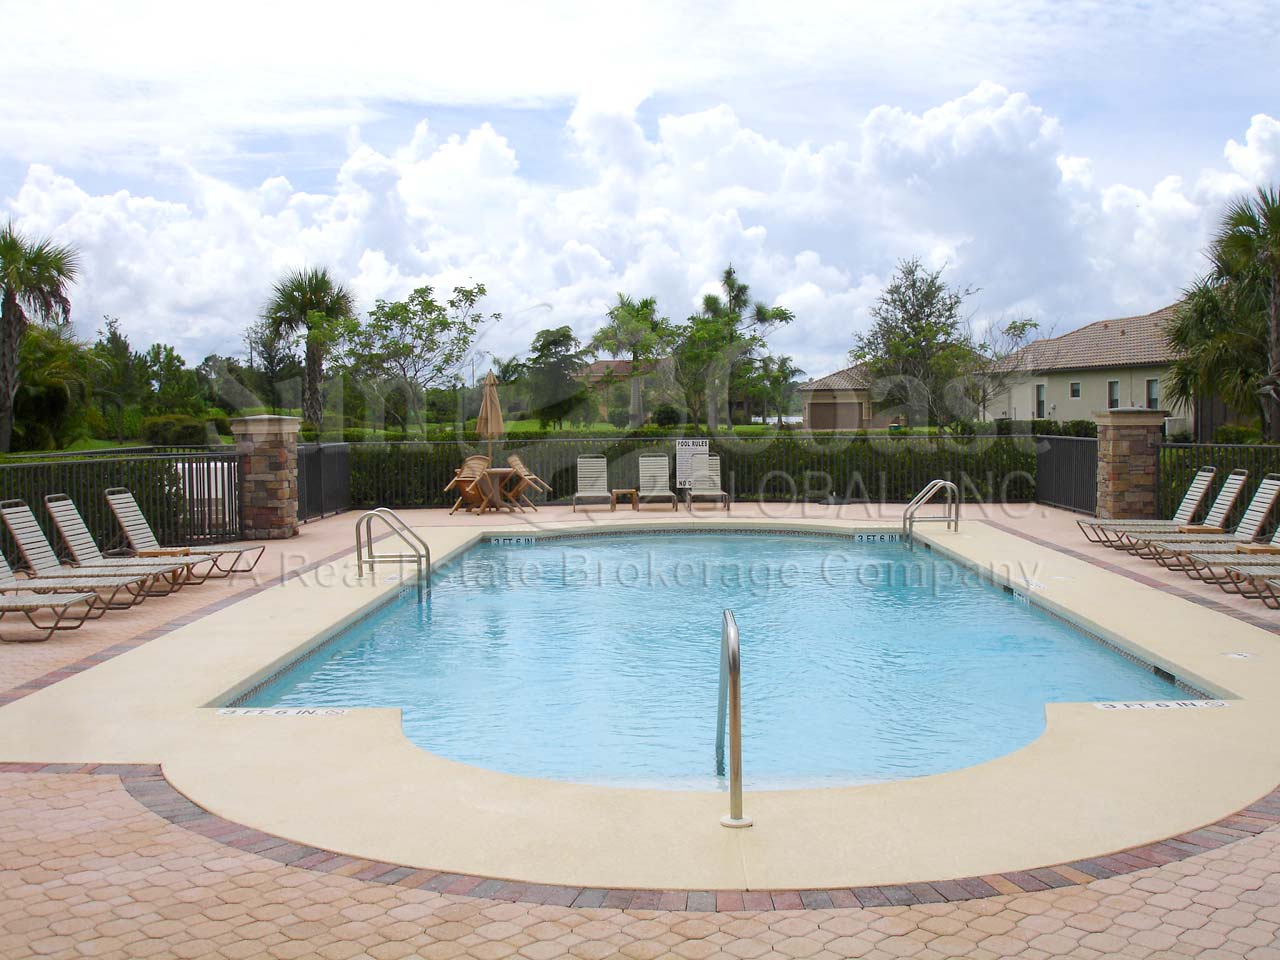 HERITAGE BAY waterfront coach homes community pool